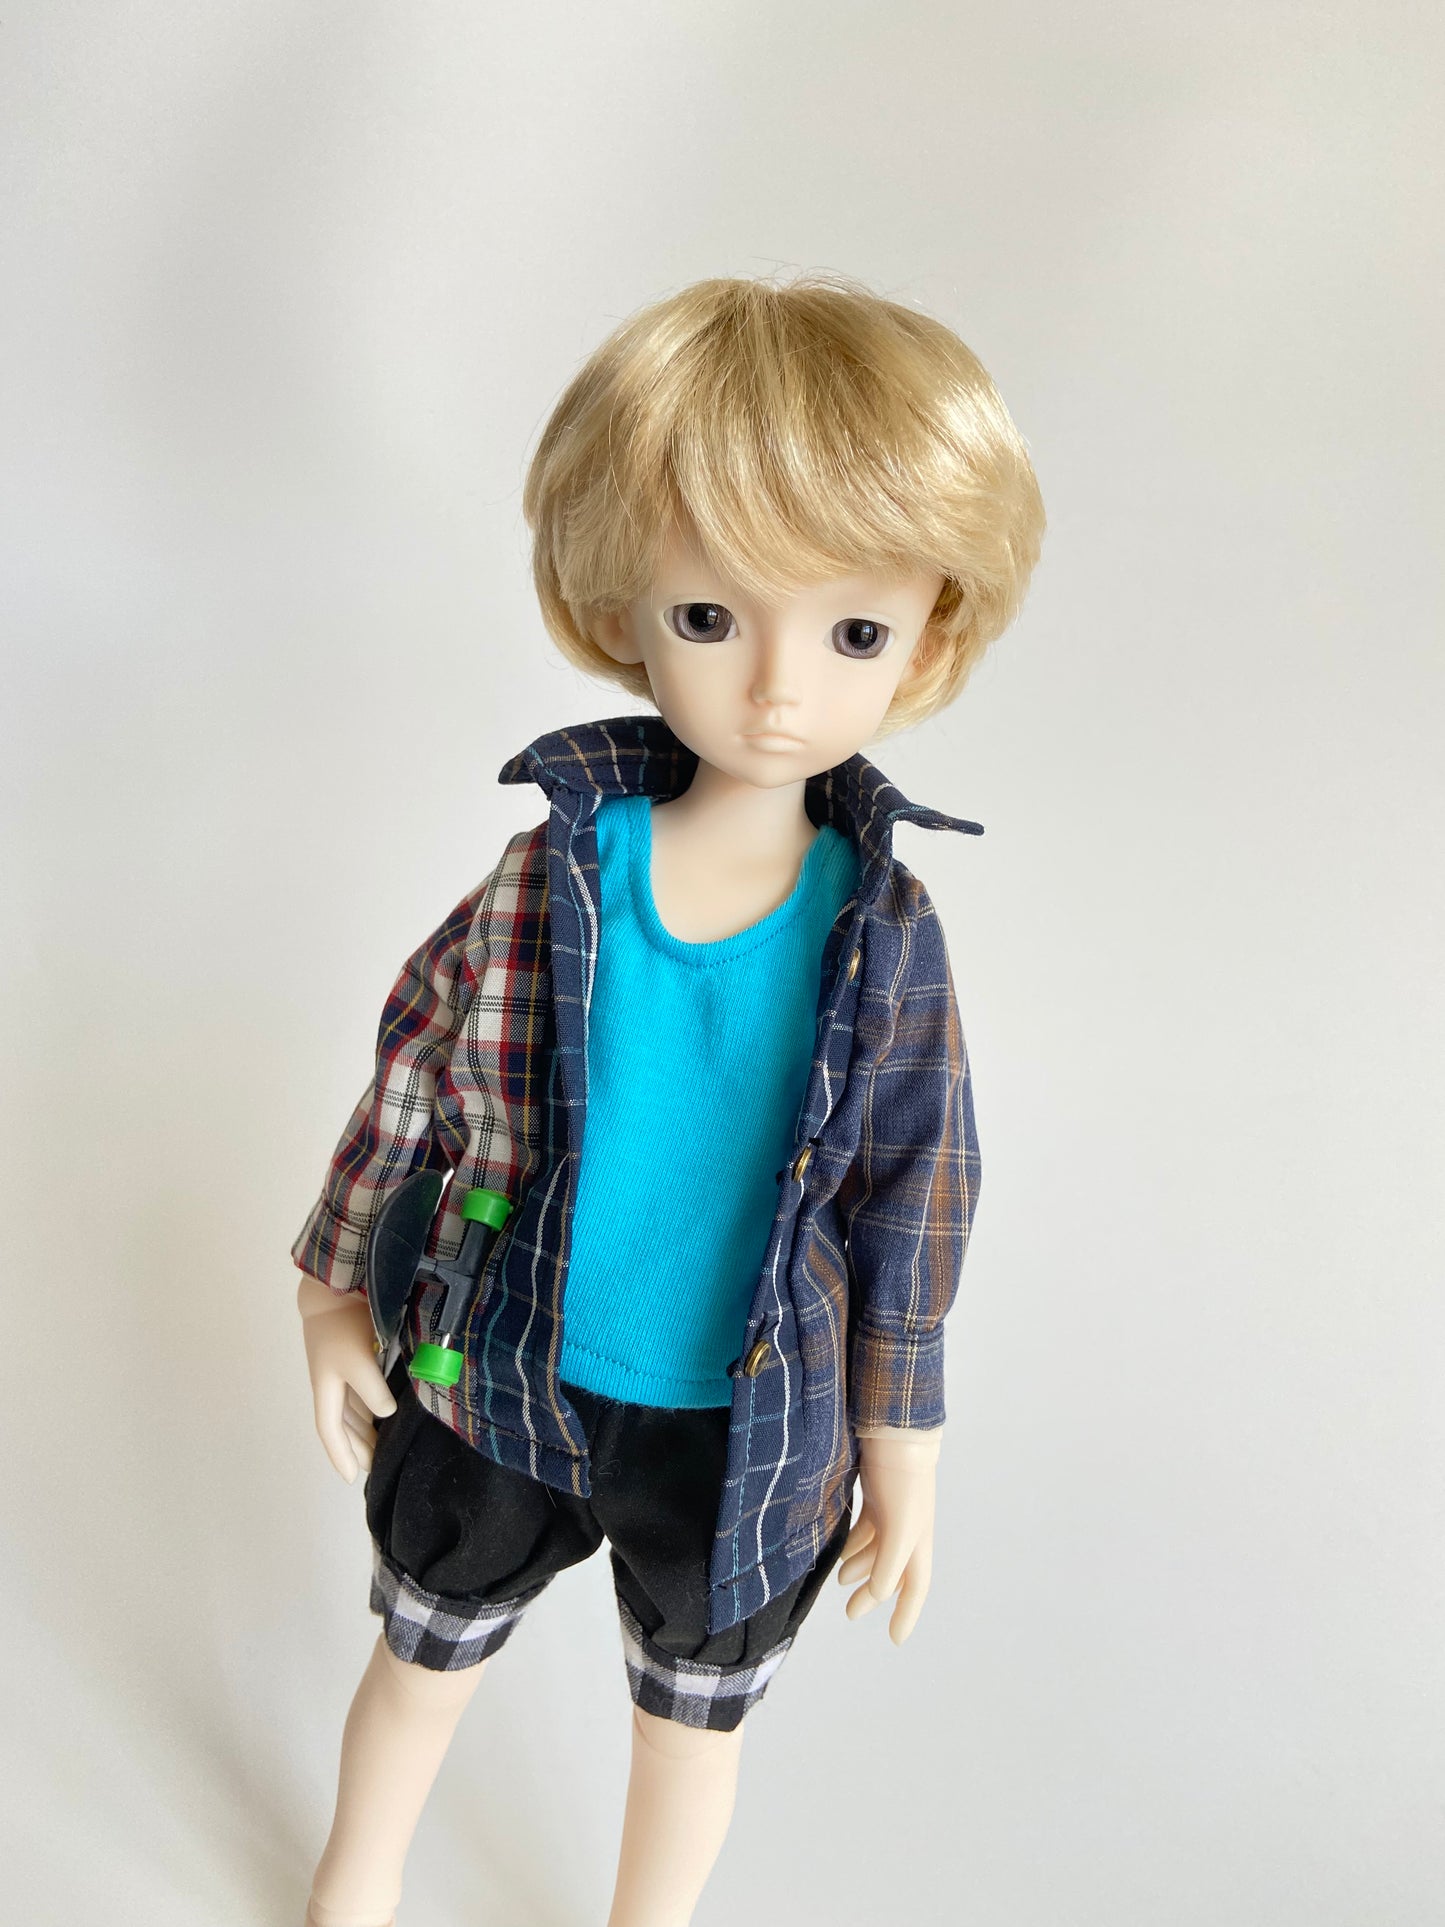 1/6 boy doll Tony in normal skin without makeup